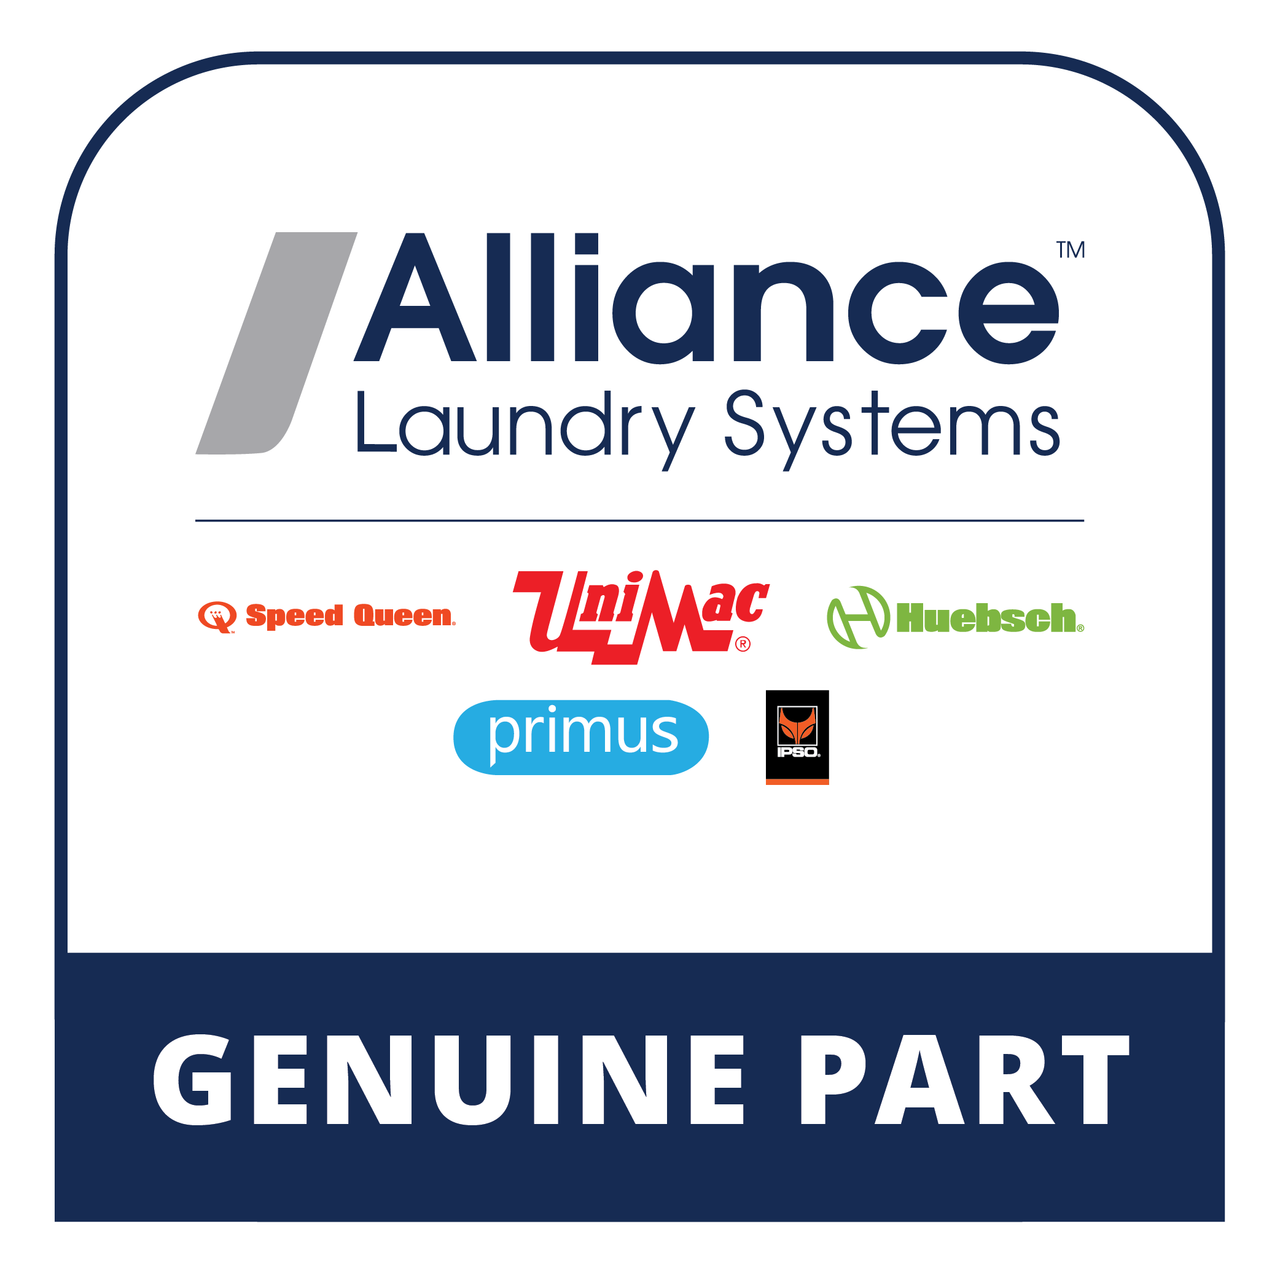 Alliance Laundry Systems F8519601 - Harn.Fec Coin/Access C020-100R - Genuine Alliance Laundry Systems Part